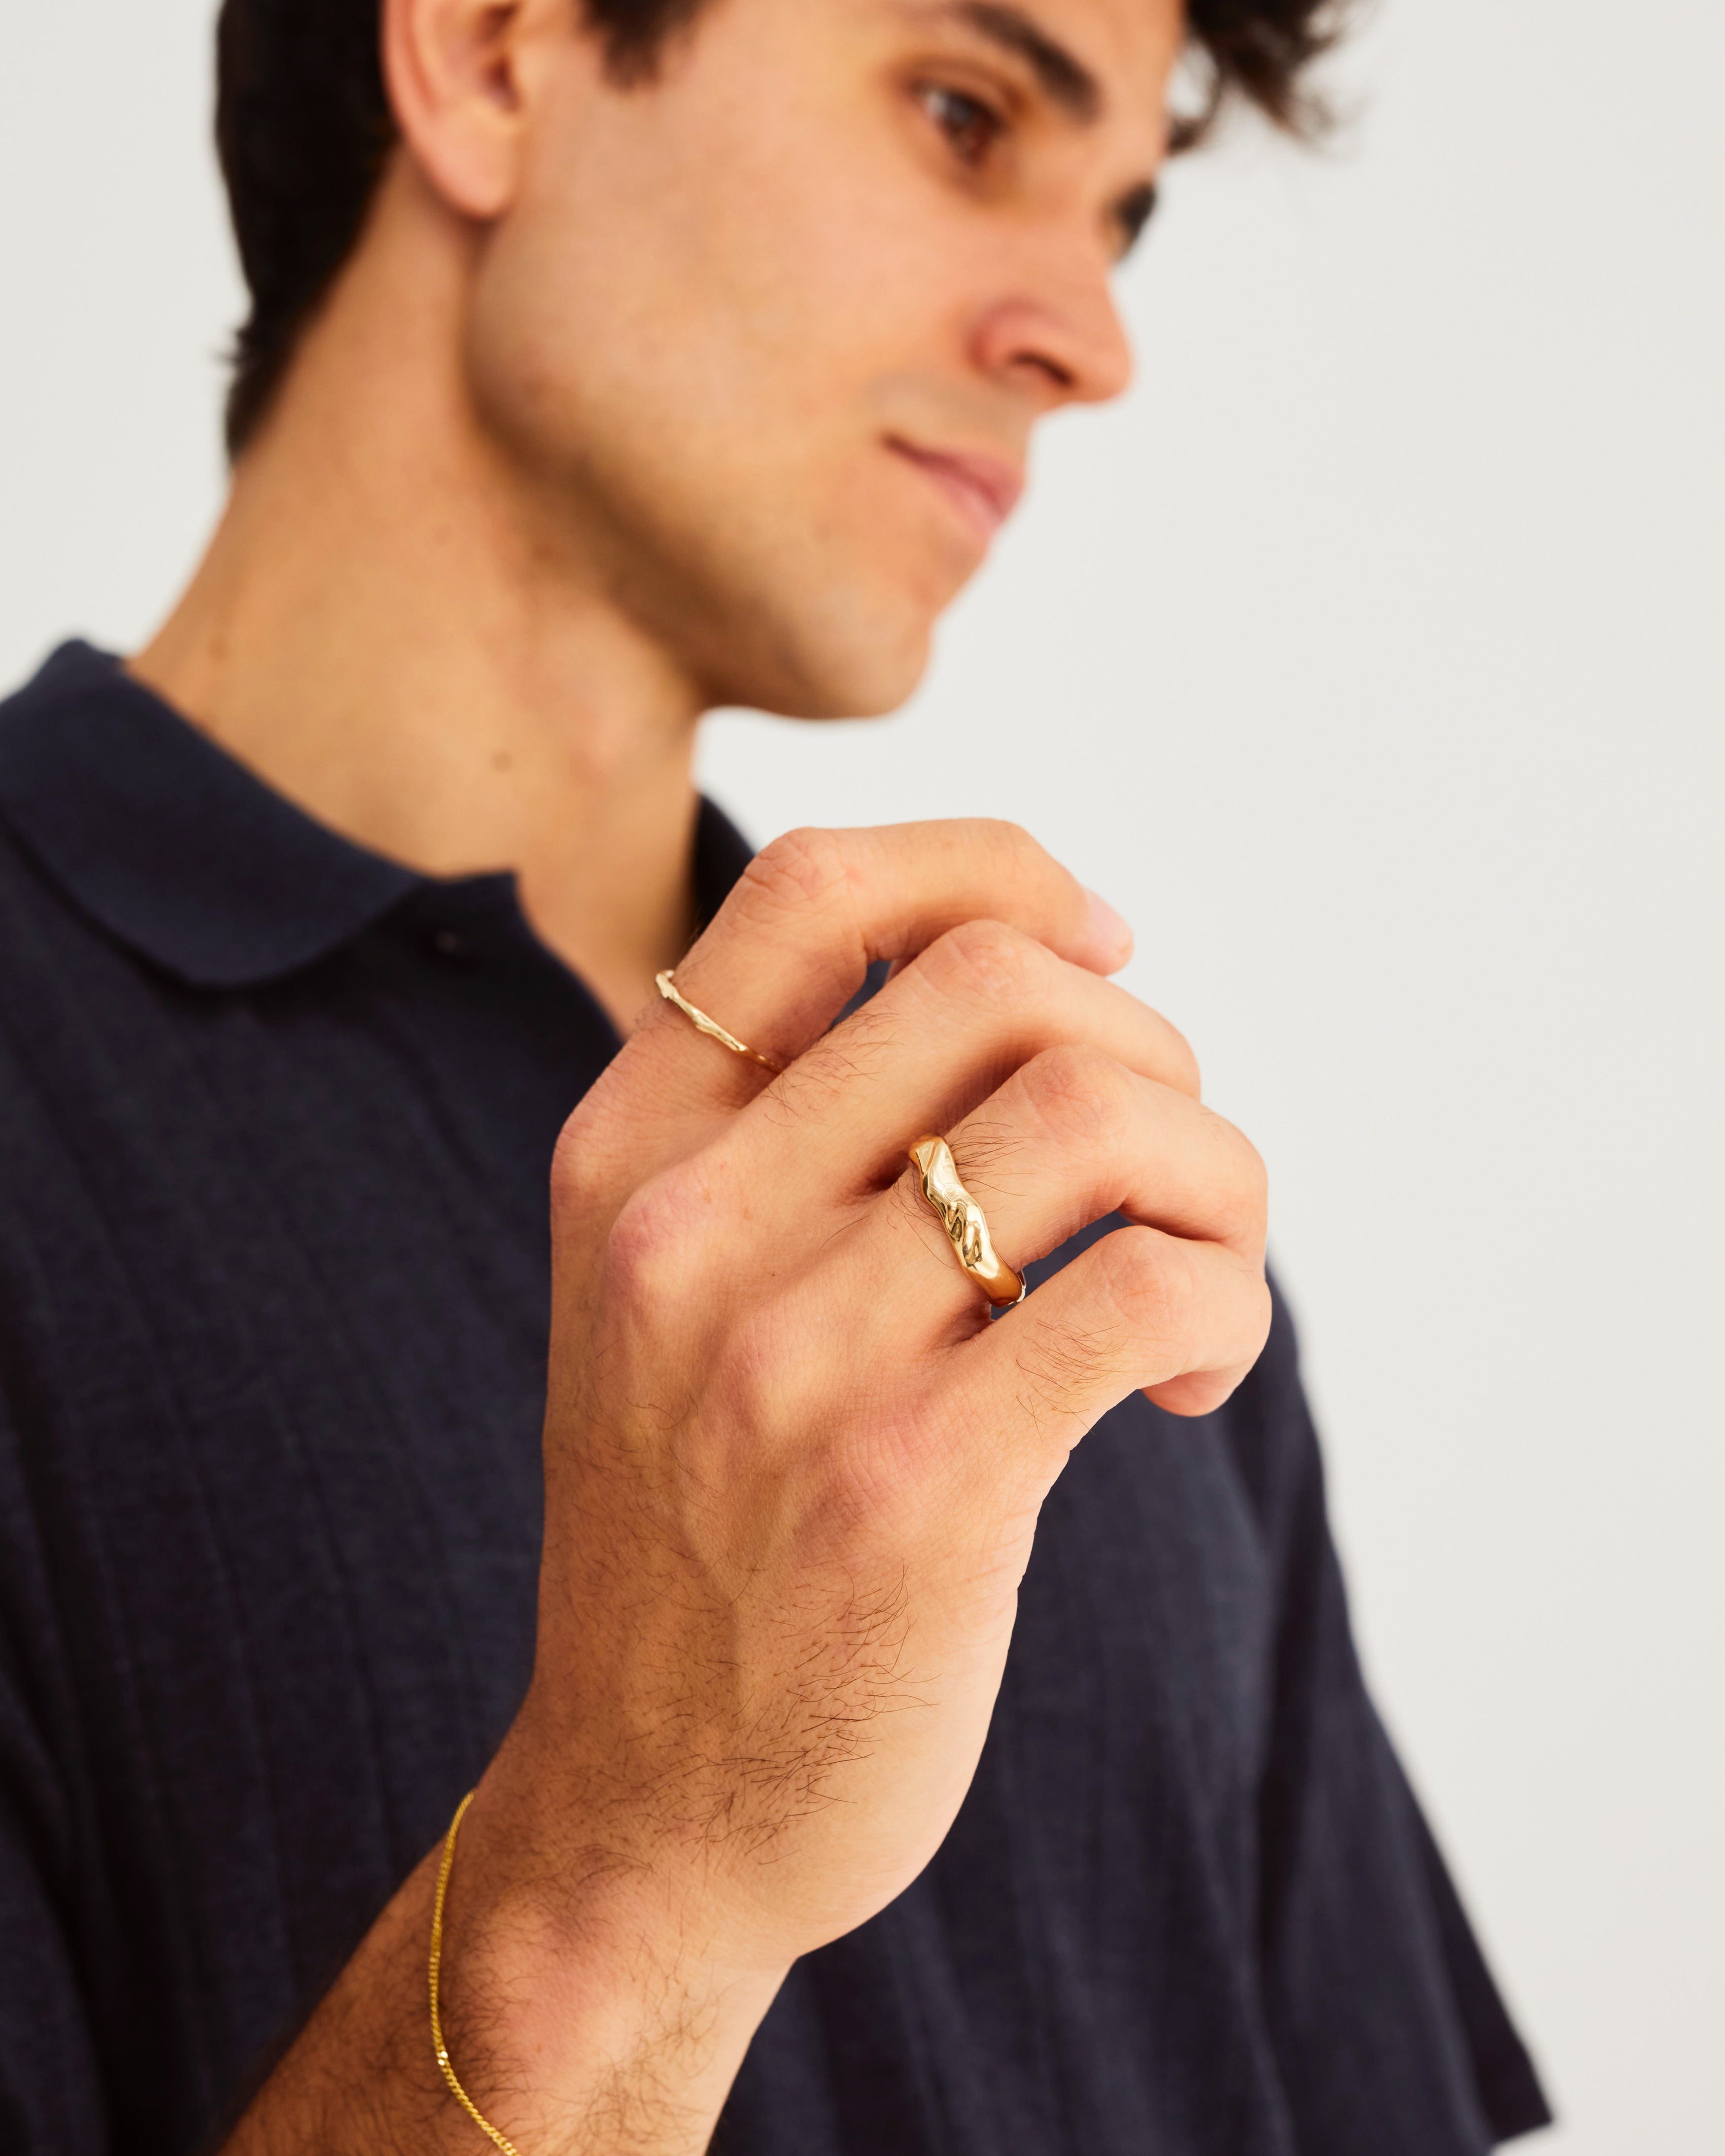 A man wears the Organic Wedding Ring in Yellow Gold